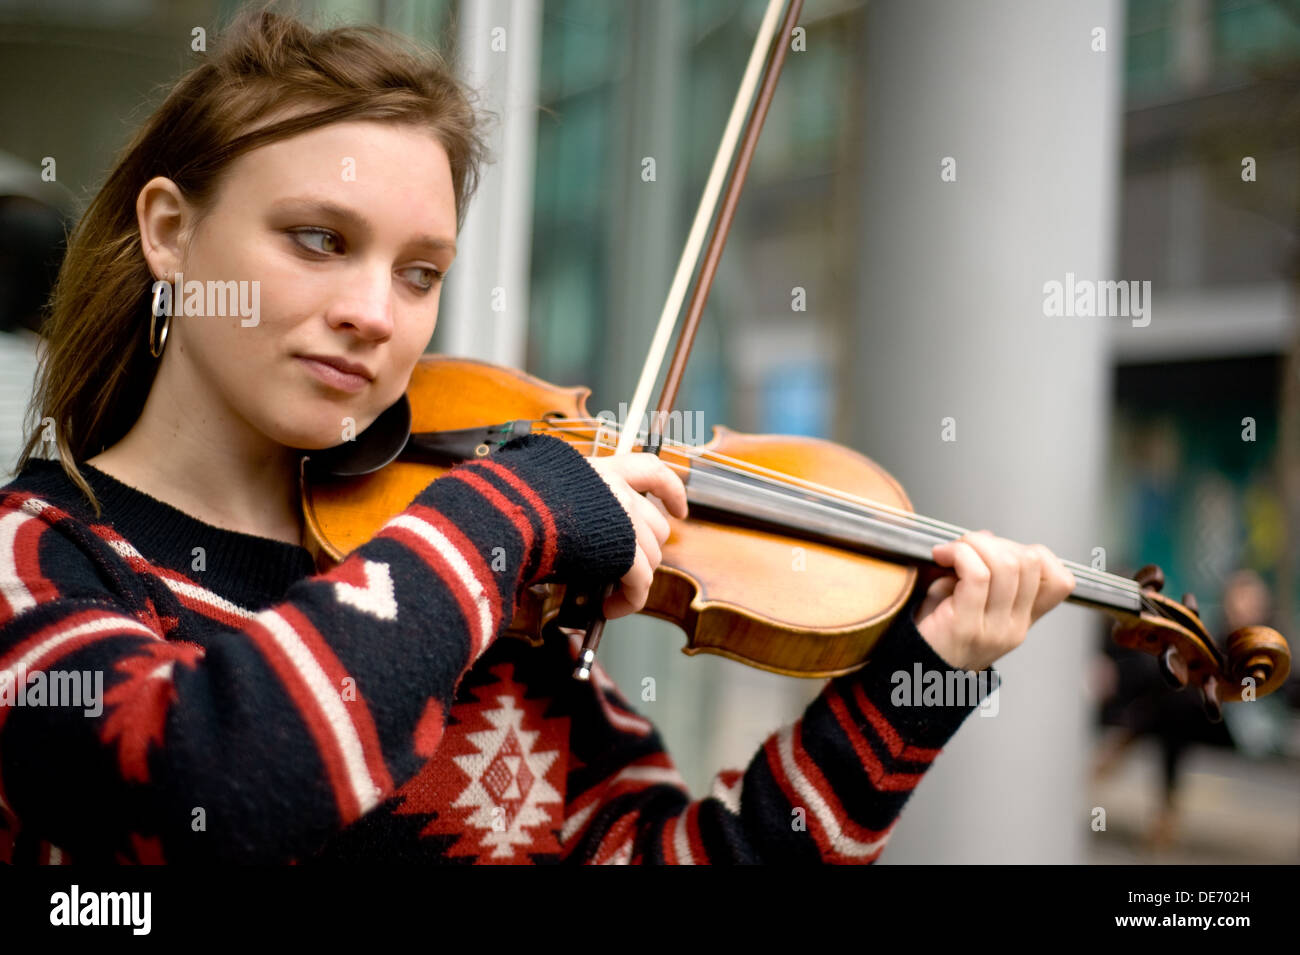 A female street musician playing the violin Stock Photo